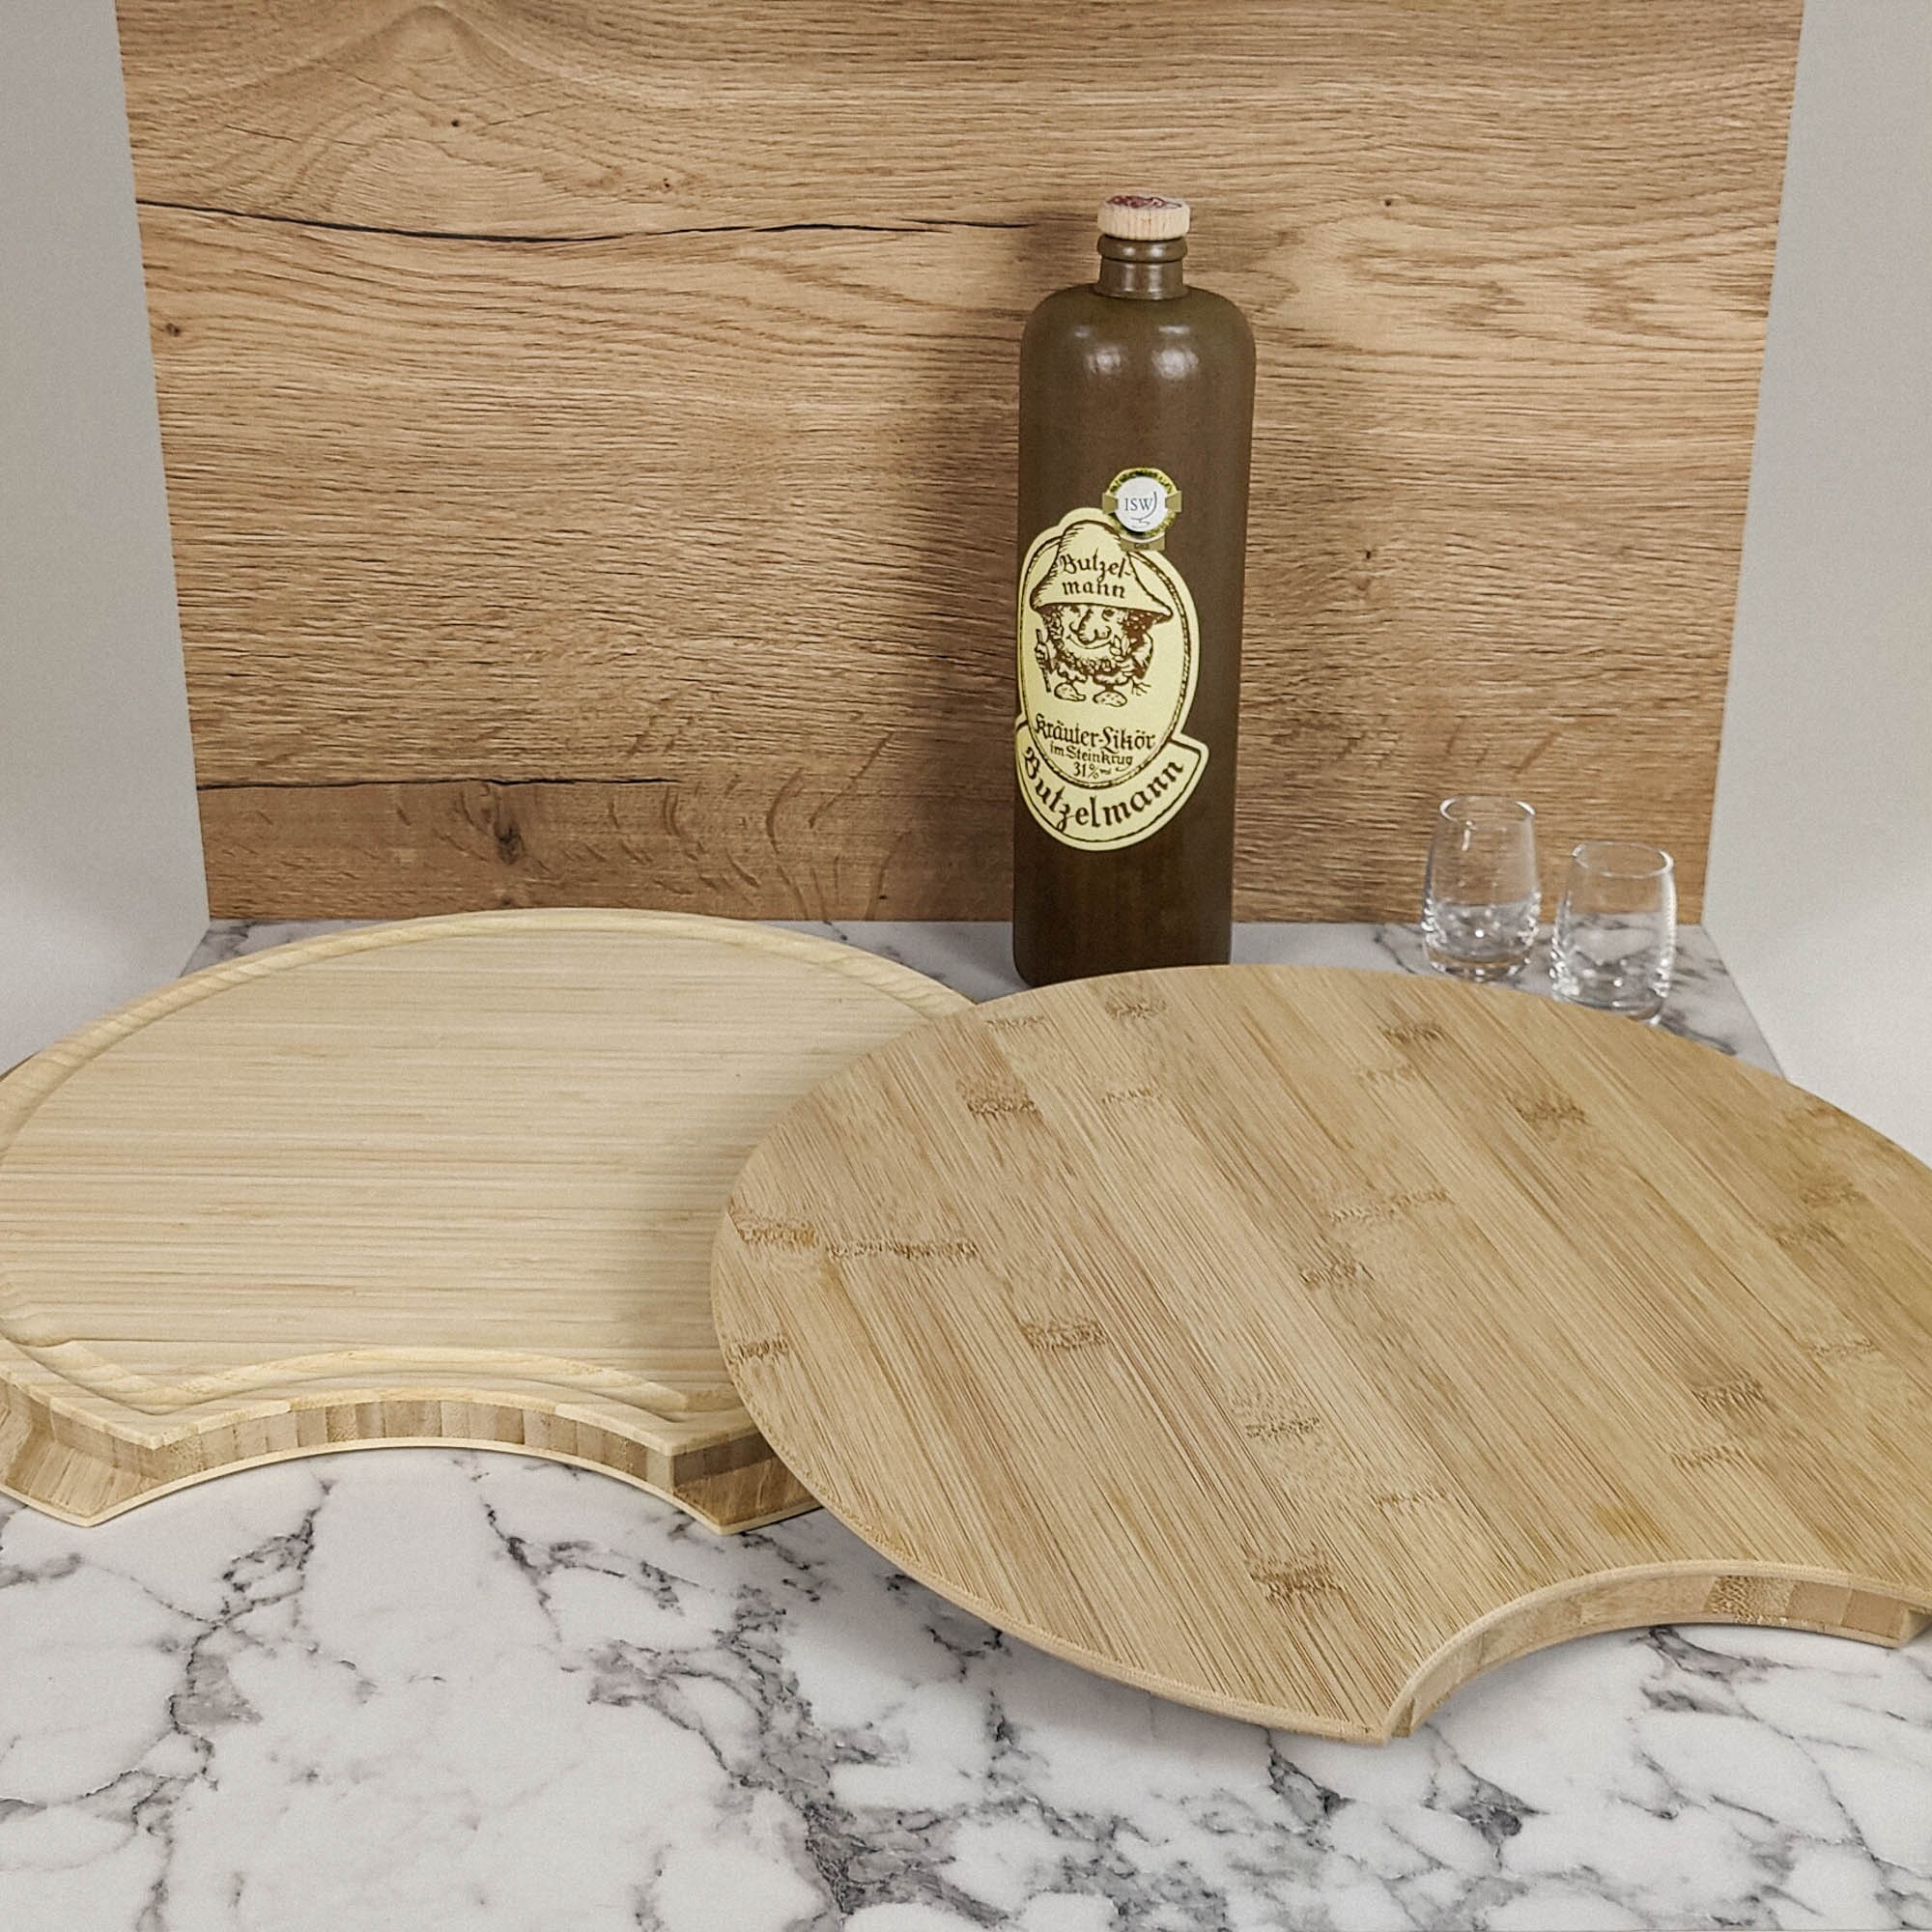 Cutting board with sink cover for Miller models